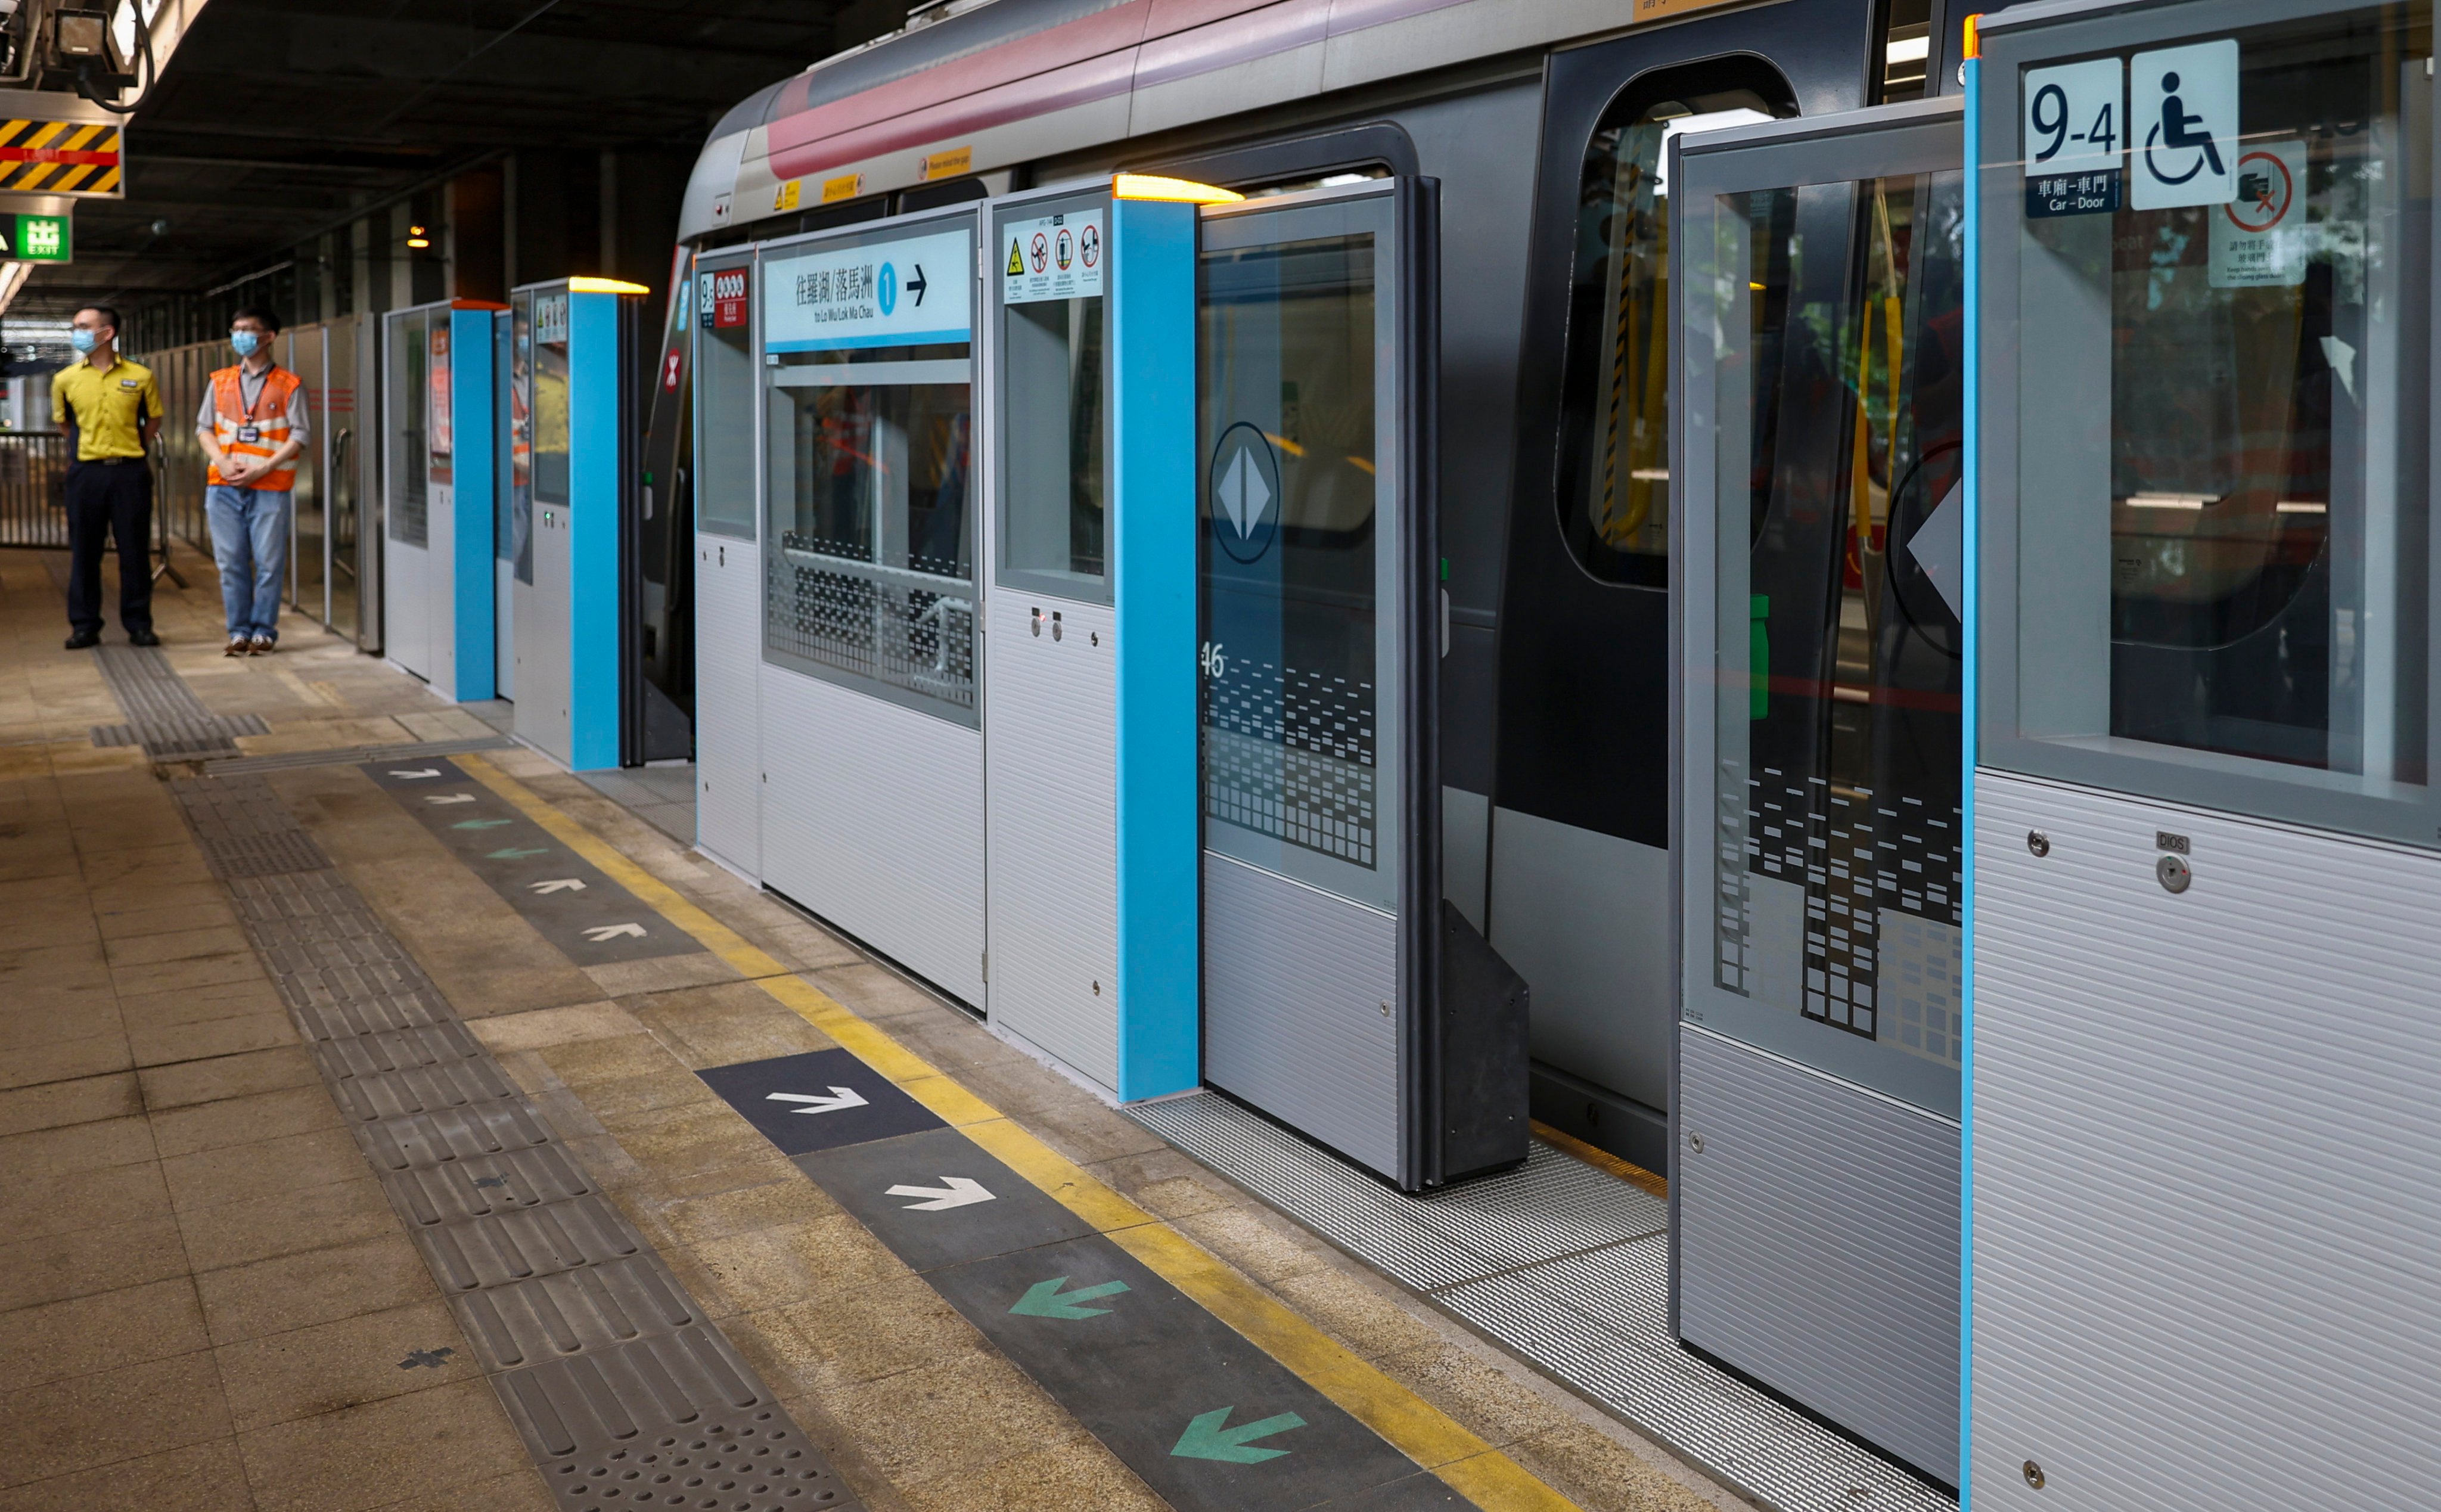 Automatic platform screen gates have been installed at Racecourse station. Photo: Yik Yeung-man